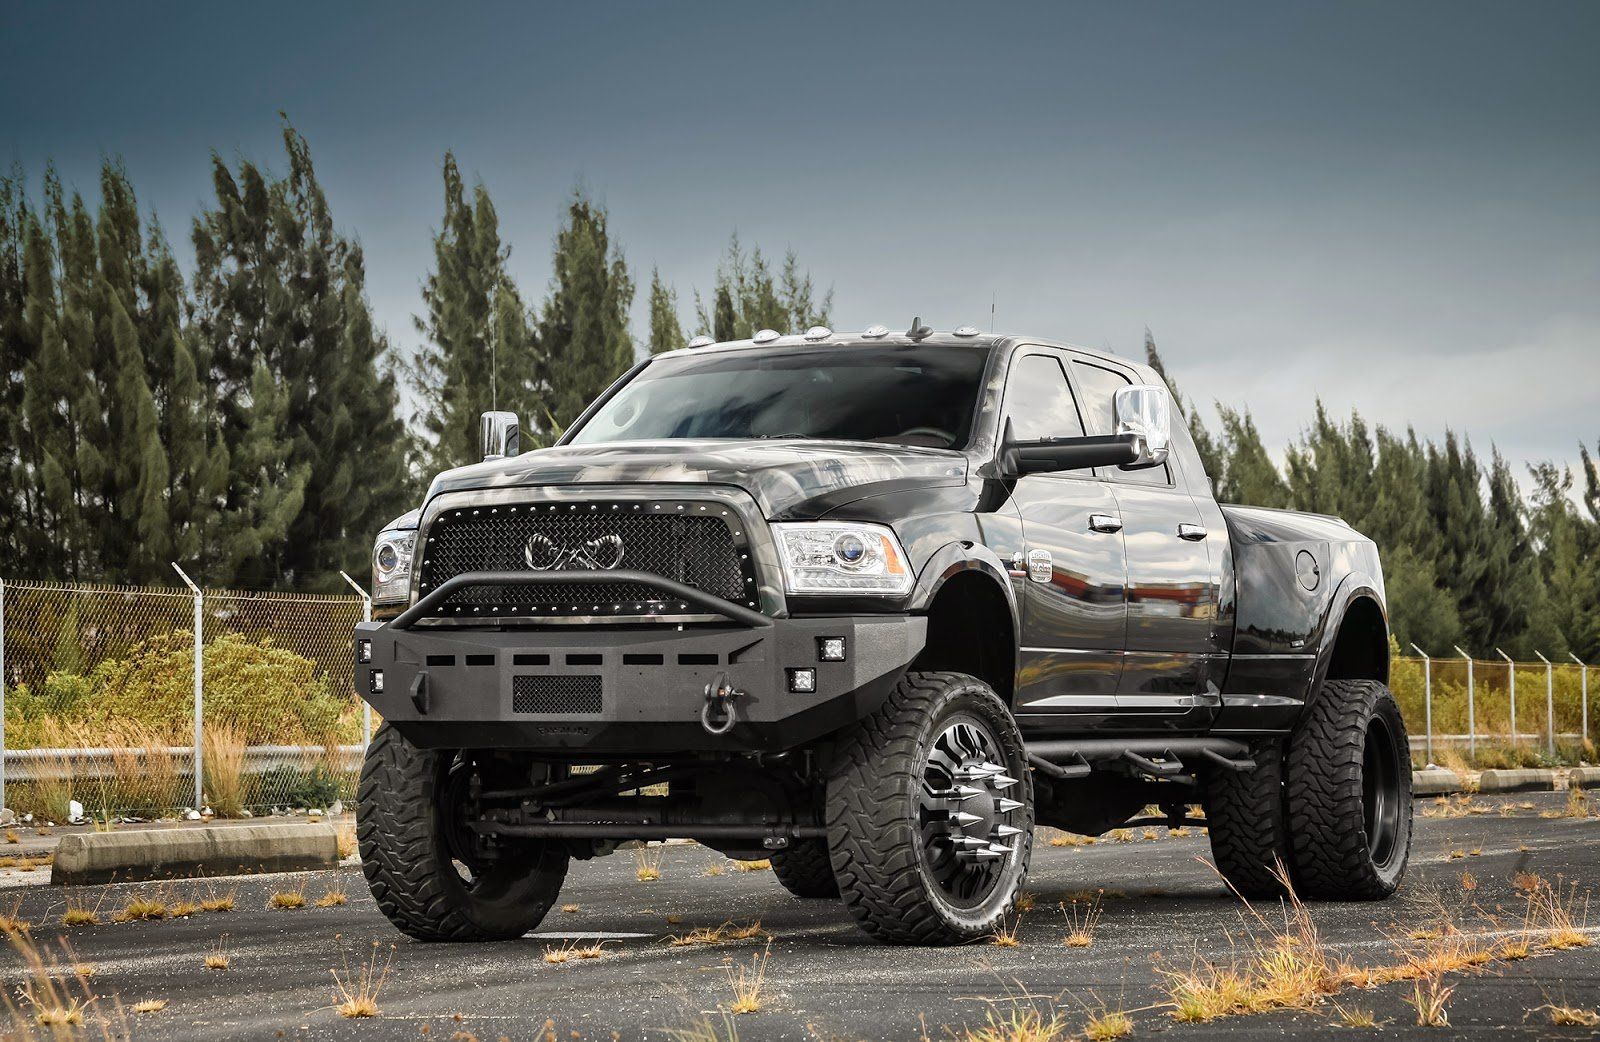 Lifted Trucks With Stacks Wallpapers.